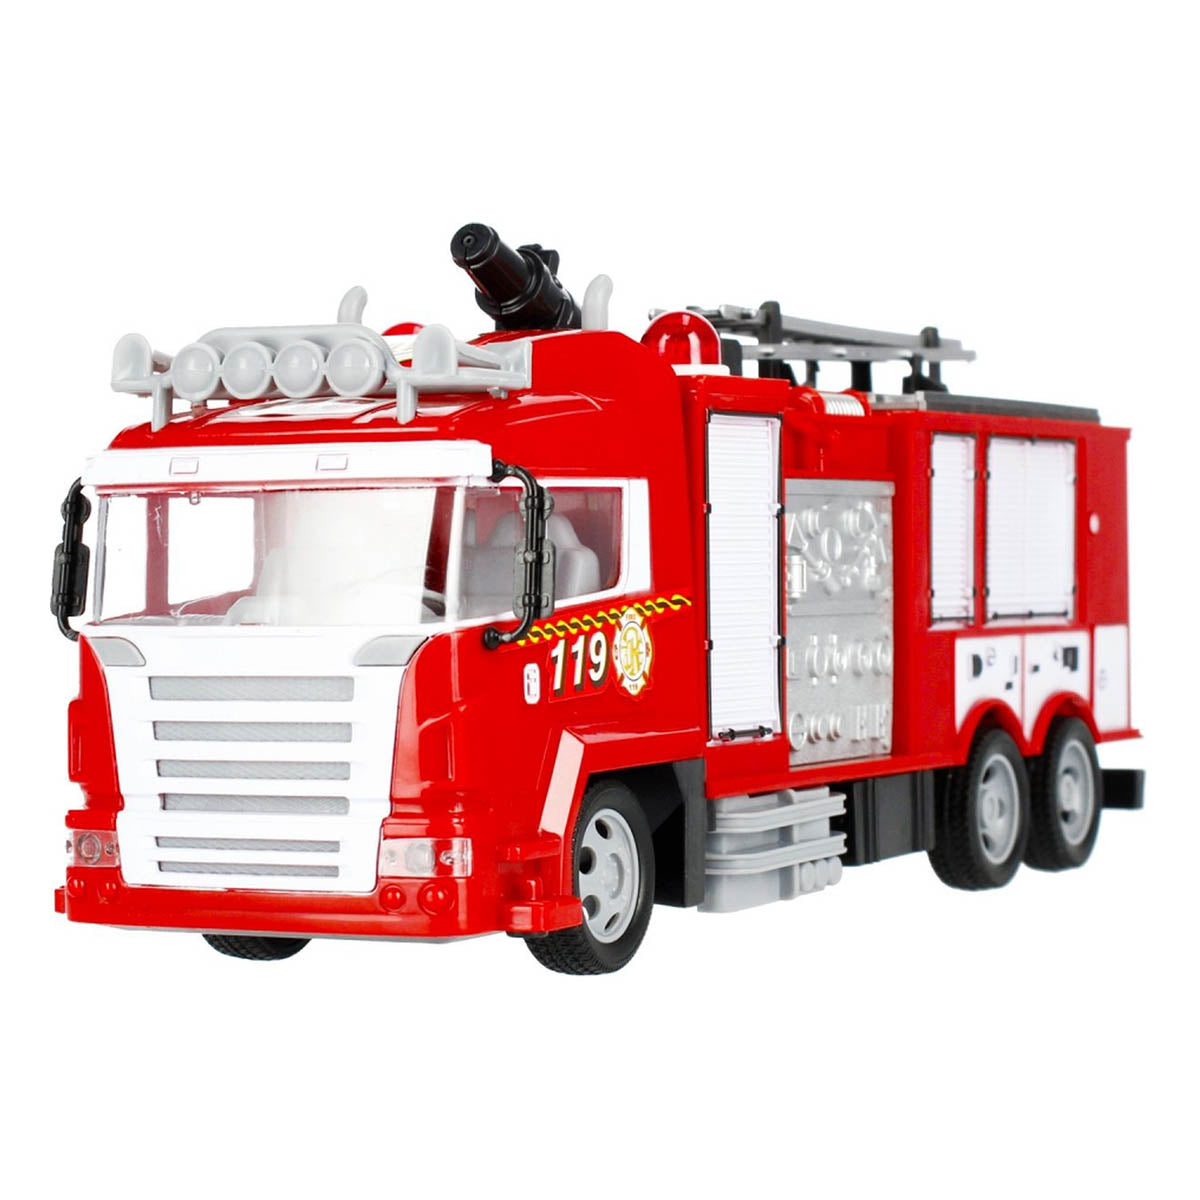 <tc>Ariko</tc> RC fire brigade water spray car - with remote control - Fire truck sprays real water and light effects - Spray car - Including battery and 2 x Philips AA batteries